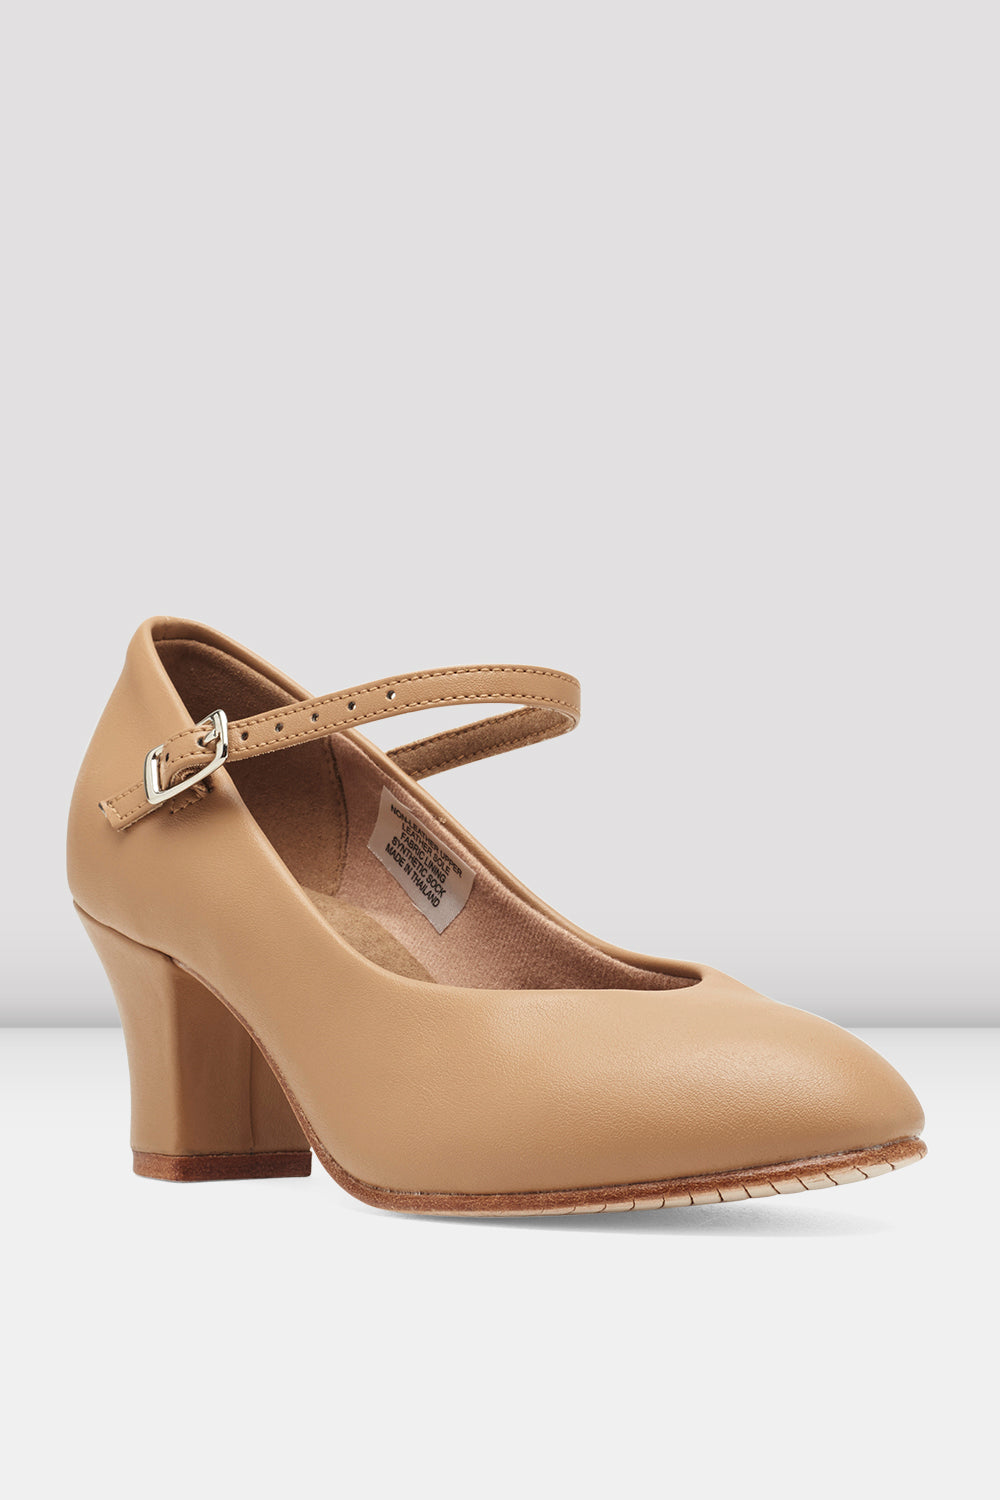 BLOCH Ladies Diva Character Shoes, Tan Synthetic Leather